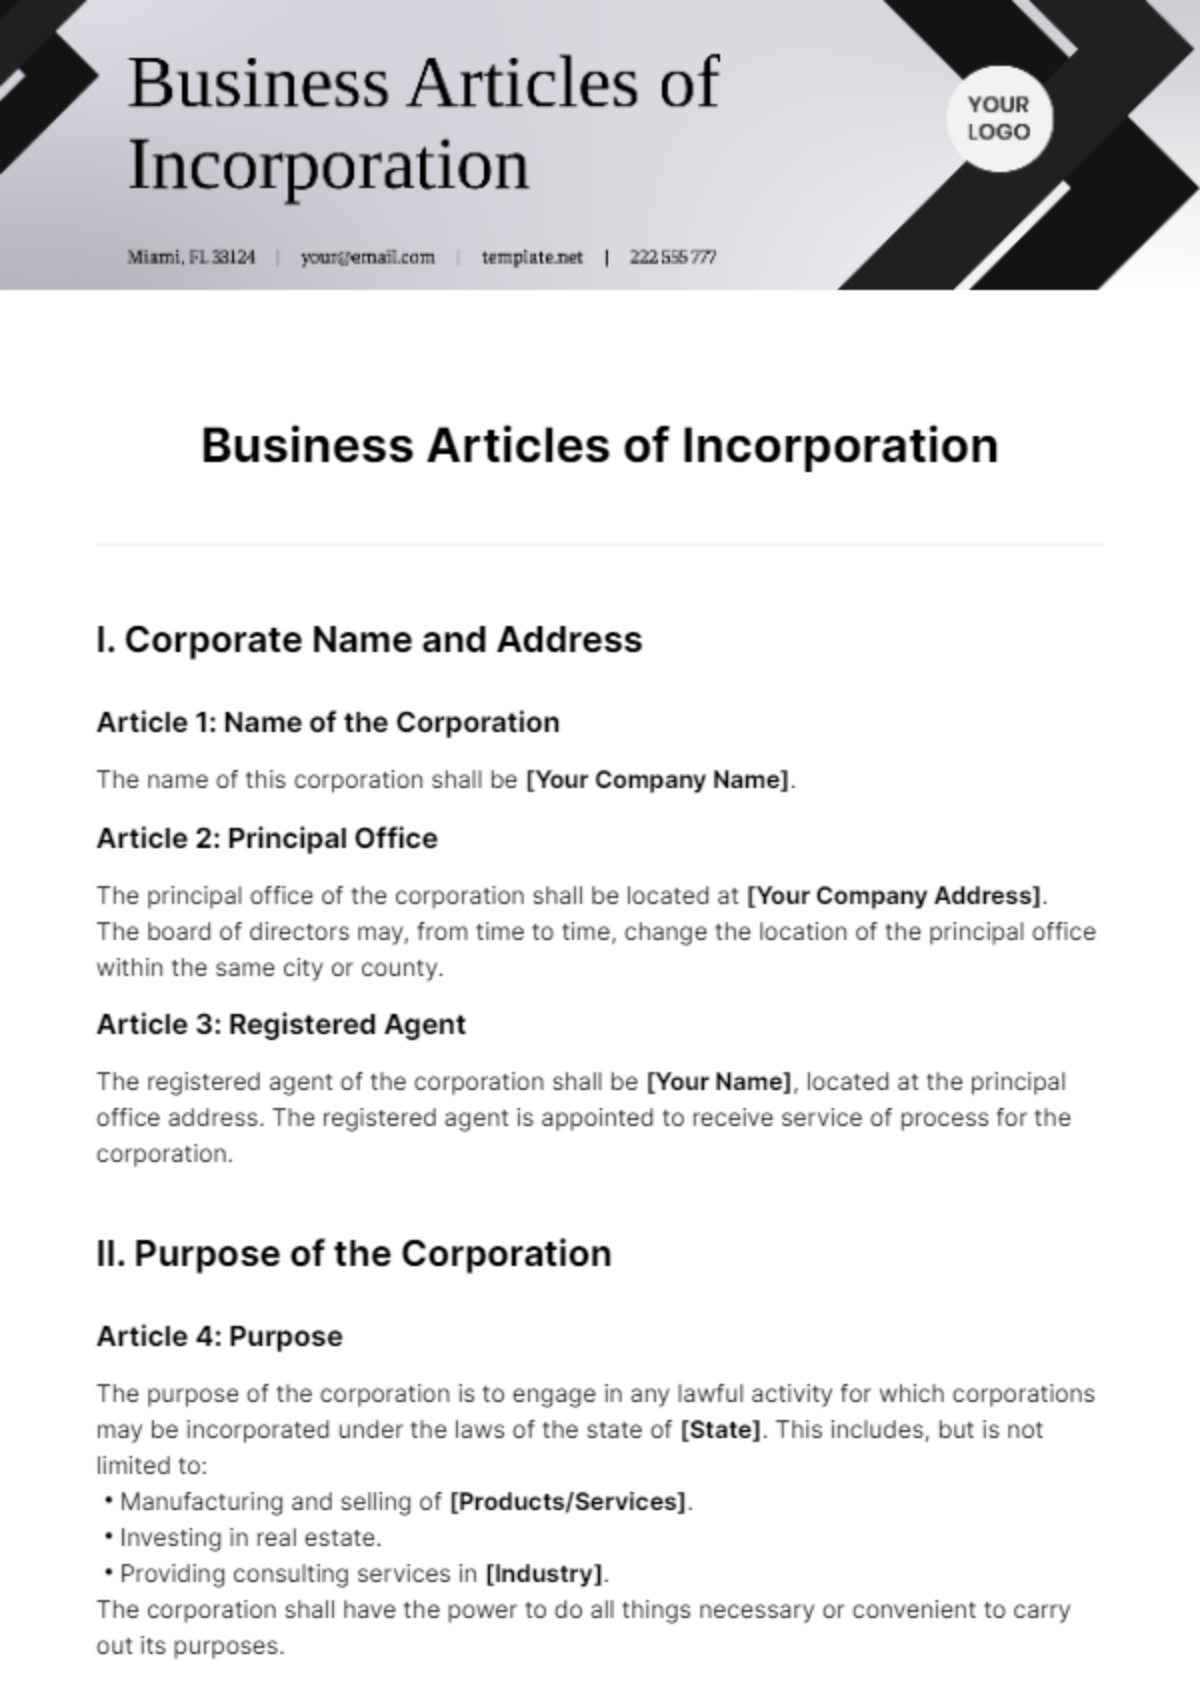 Business Articles of Incorporation Template